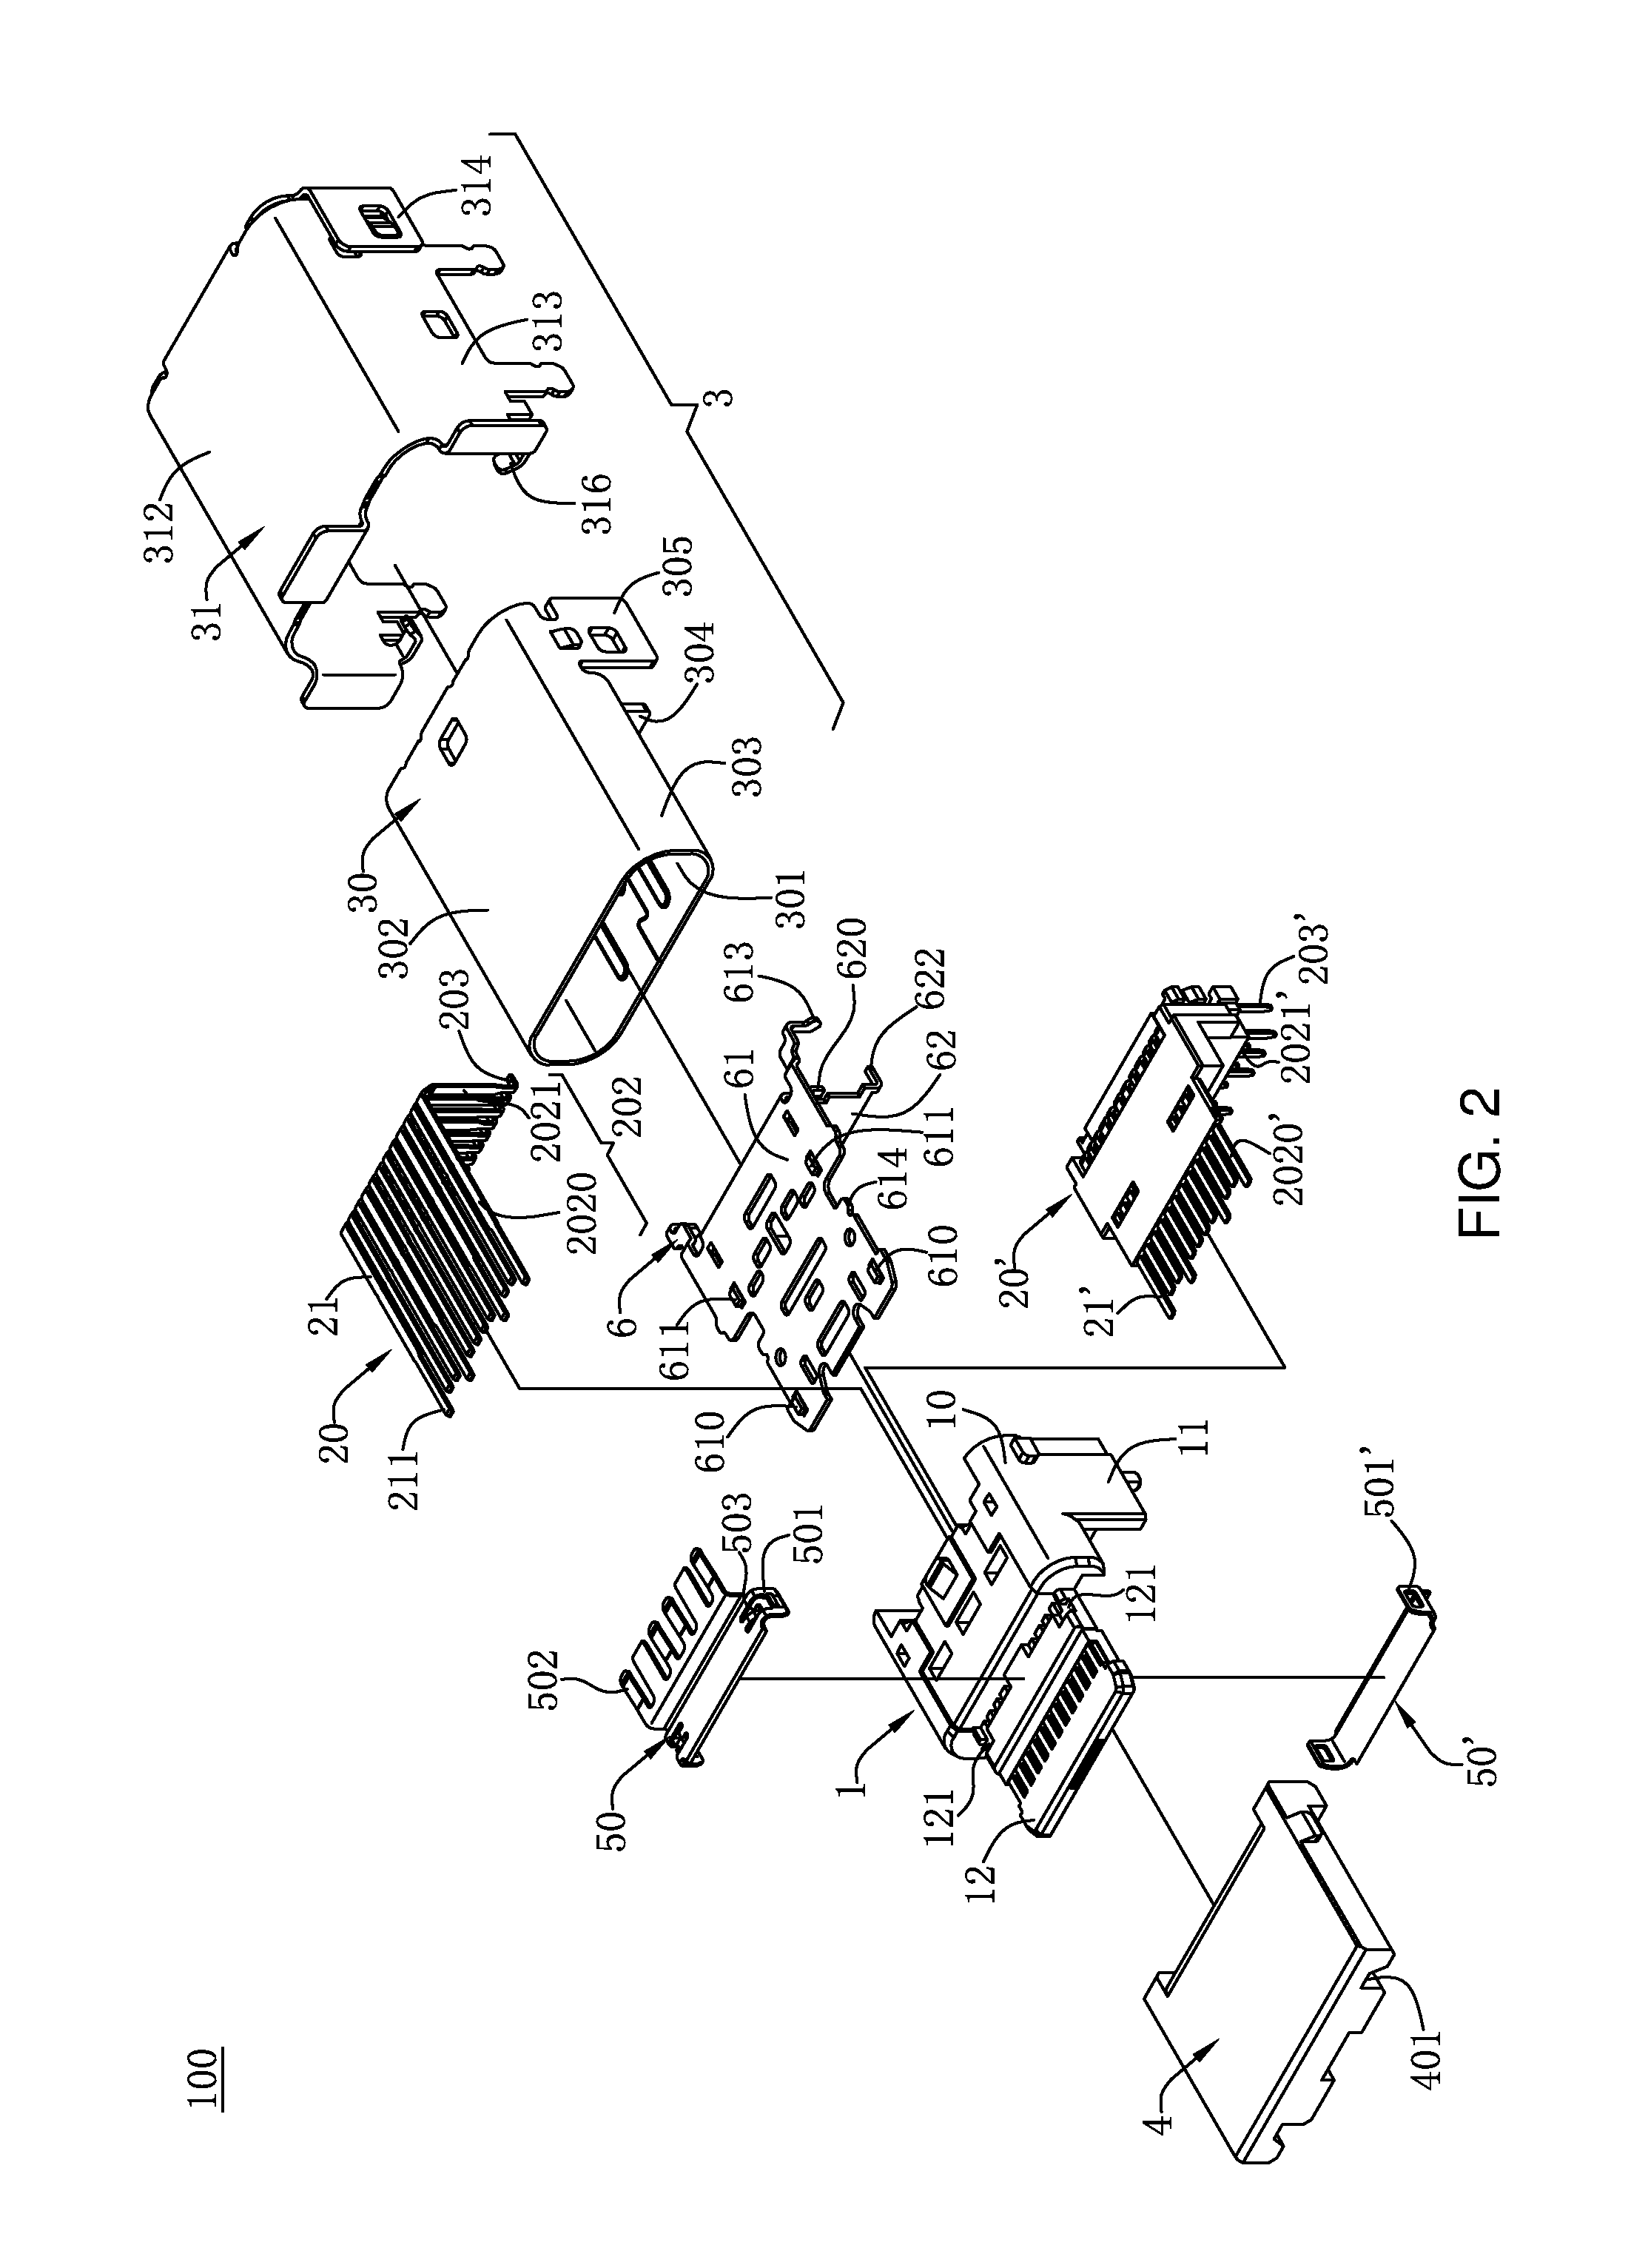 Electrical connector having a ground terminal with contact portions in contact with a shielding sheet